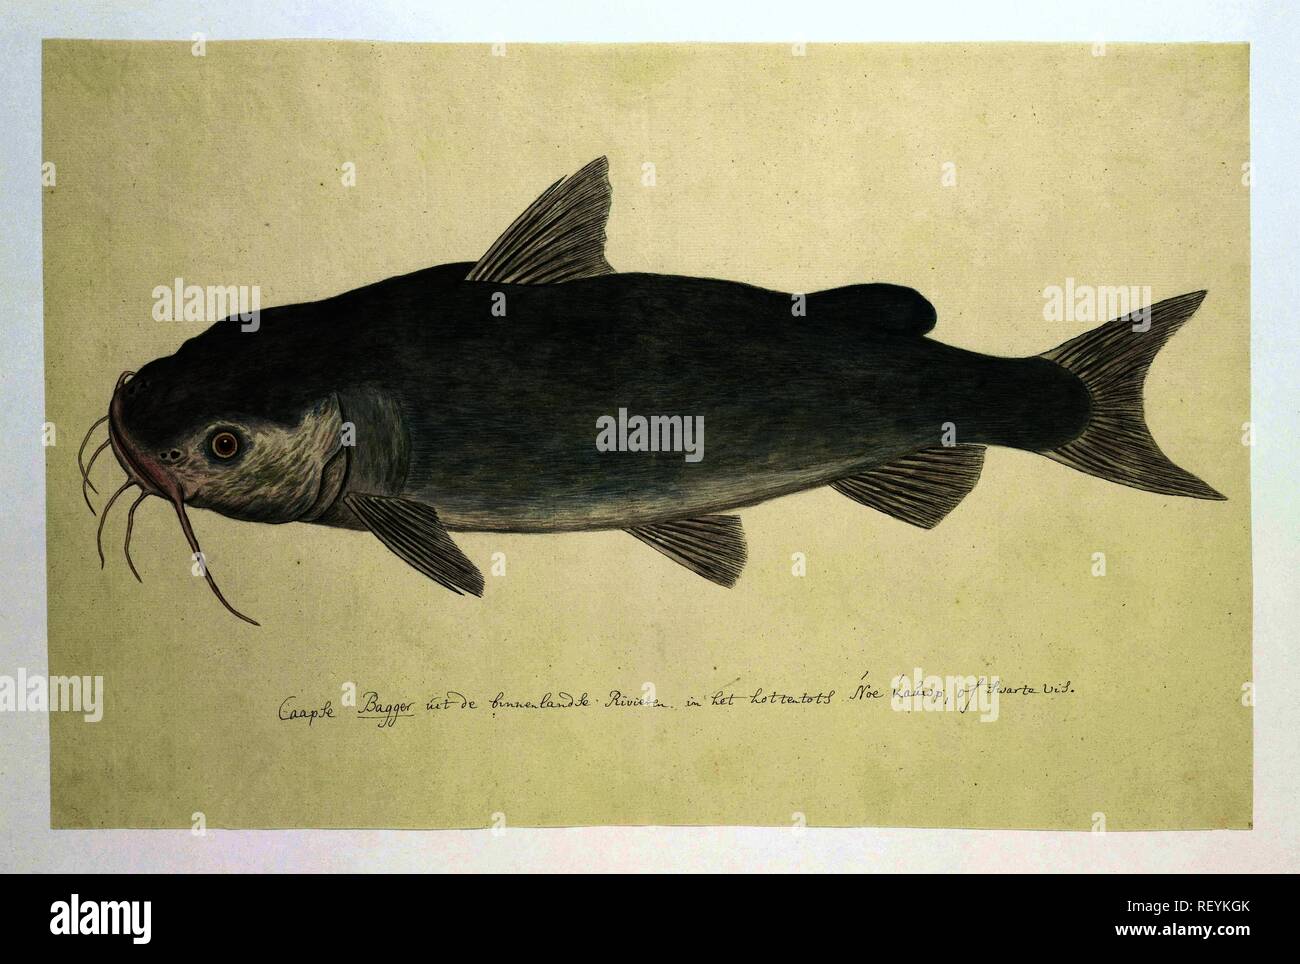 Clarias stappersii (catfish). Draughtsman: Robert Jacob Gordon (attributed to). Dating: Oct-1777 - Mar-1786. Measurements: h 660 mm × w 480 mm; h 334 mm × w 508 mm. Museum: Rijksmuseum, Amsterdam. Stock Photo